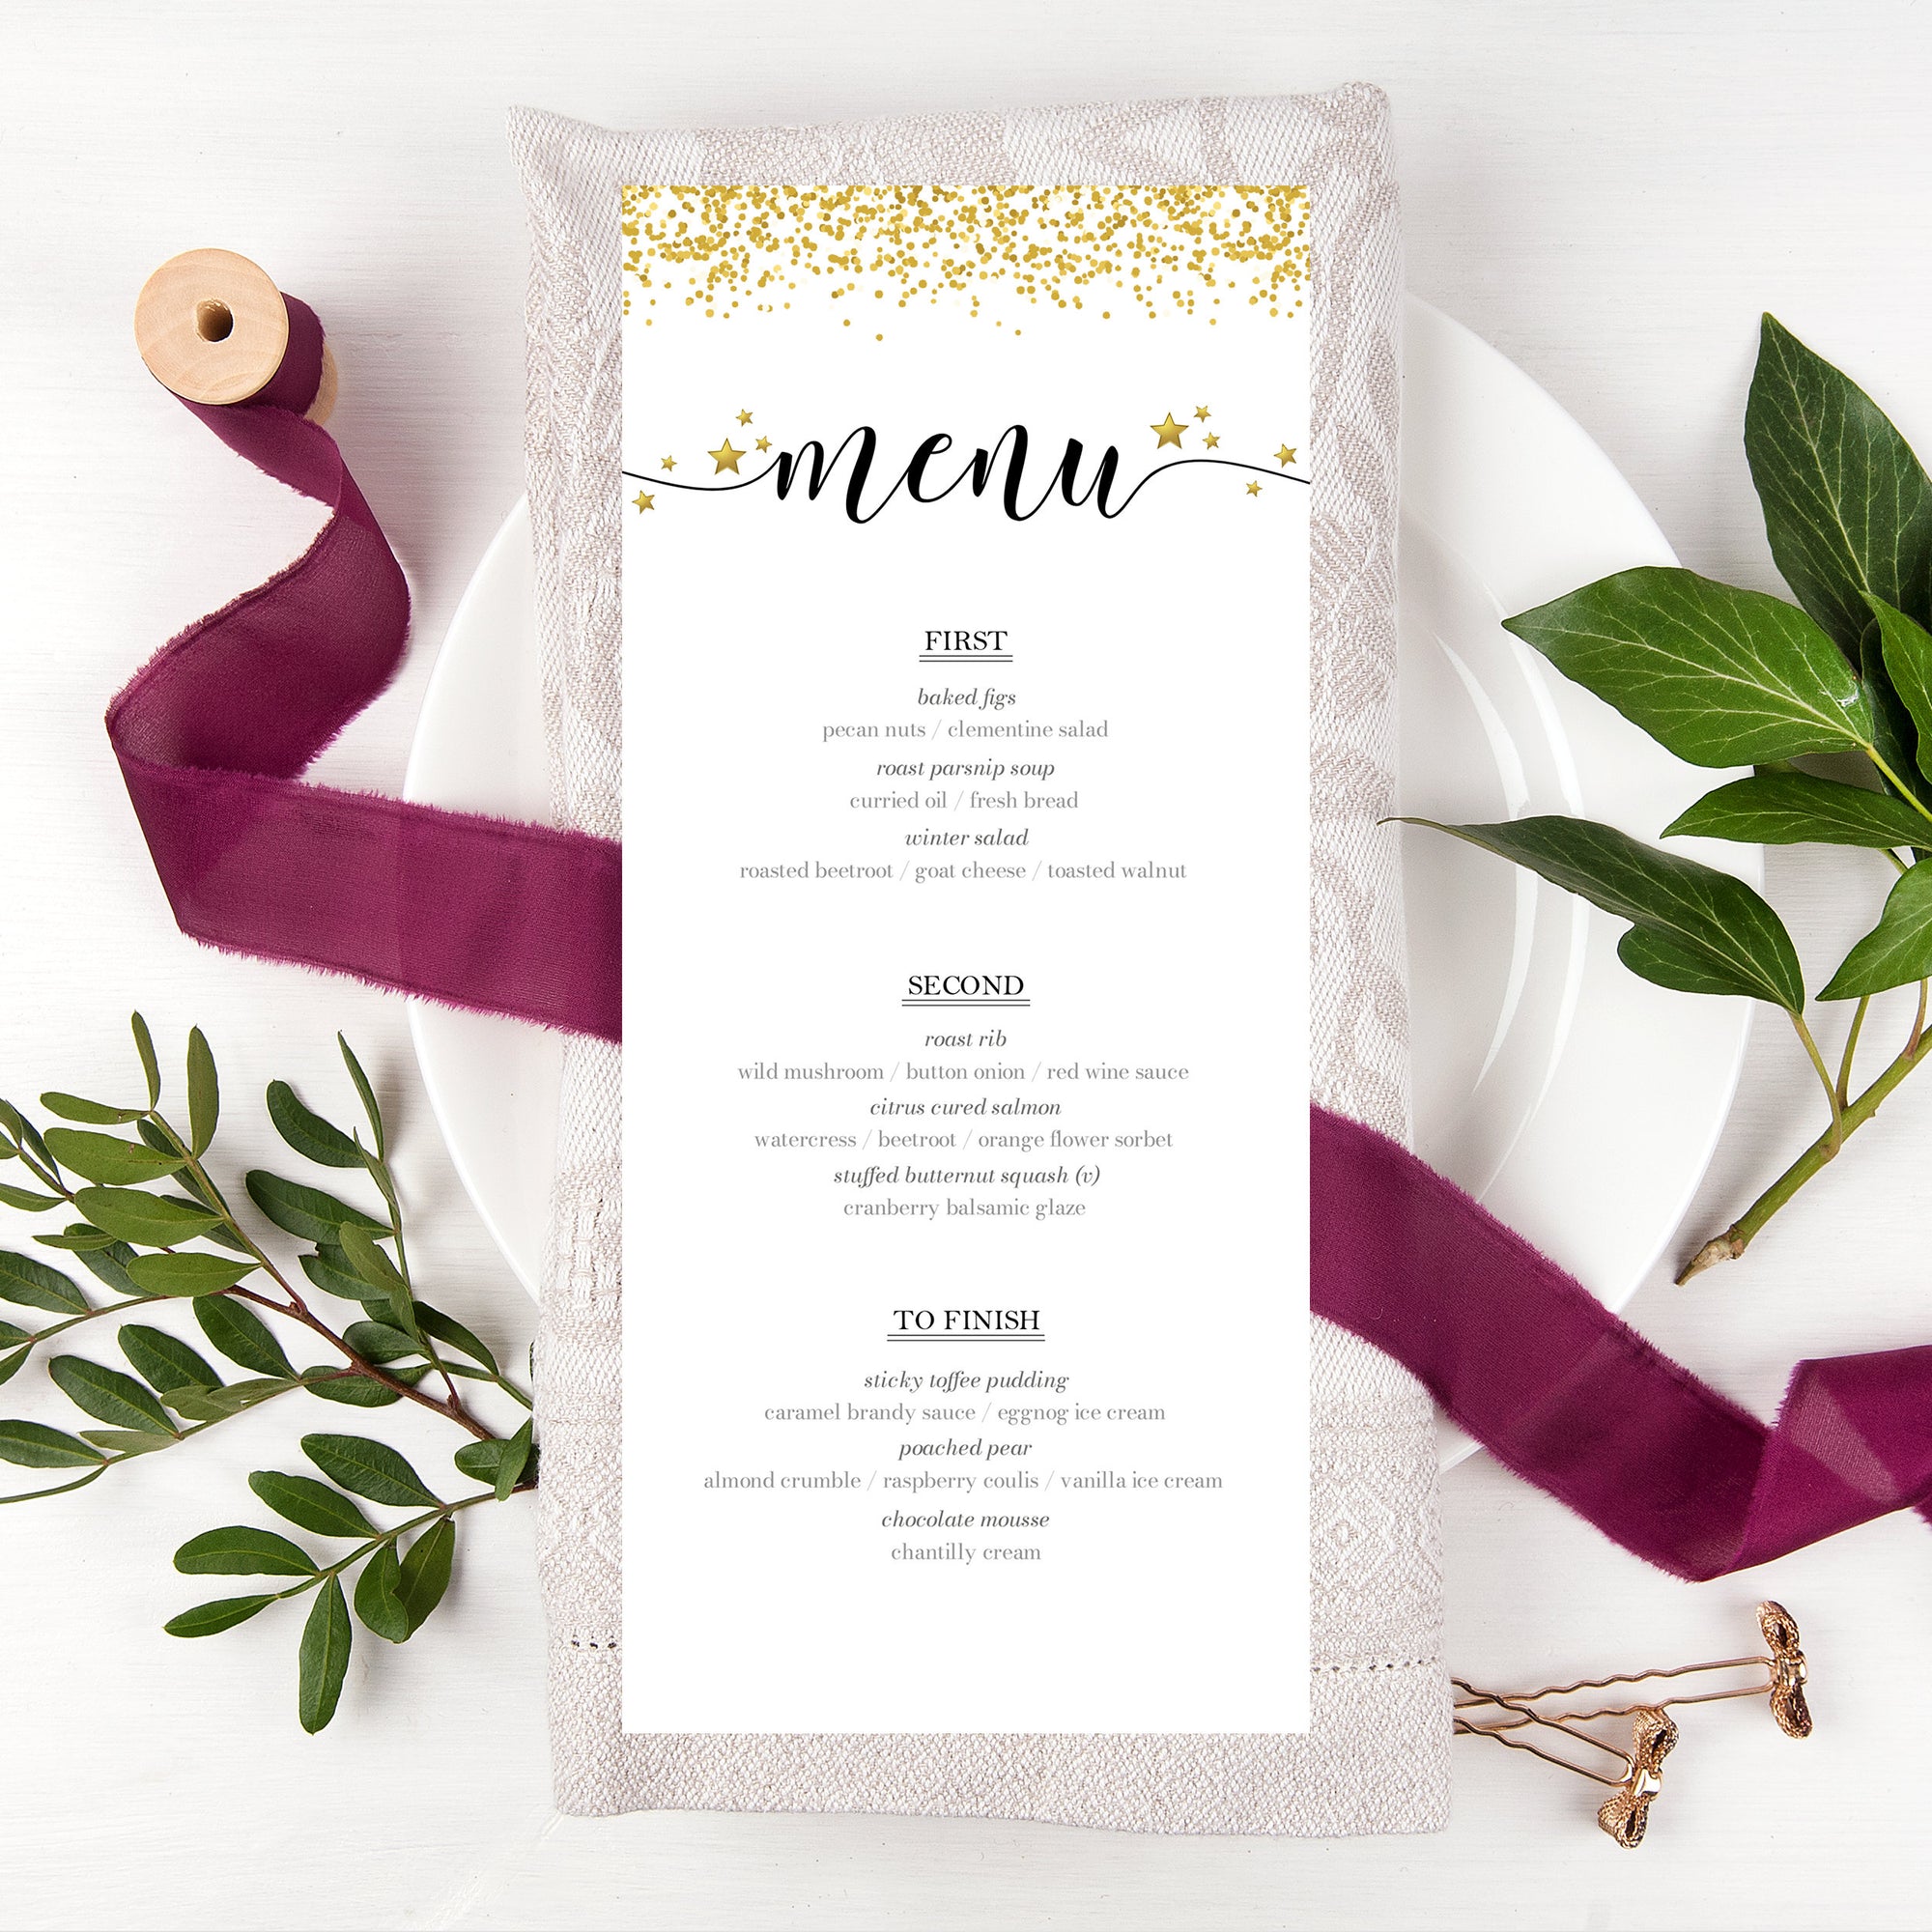 2020 New Years Eve Menu Template, Printable New Years Eve Decorations, New Years Eve Table Decor, Editable DIGITAL DOWNLOAD - NY100